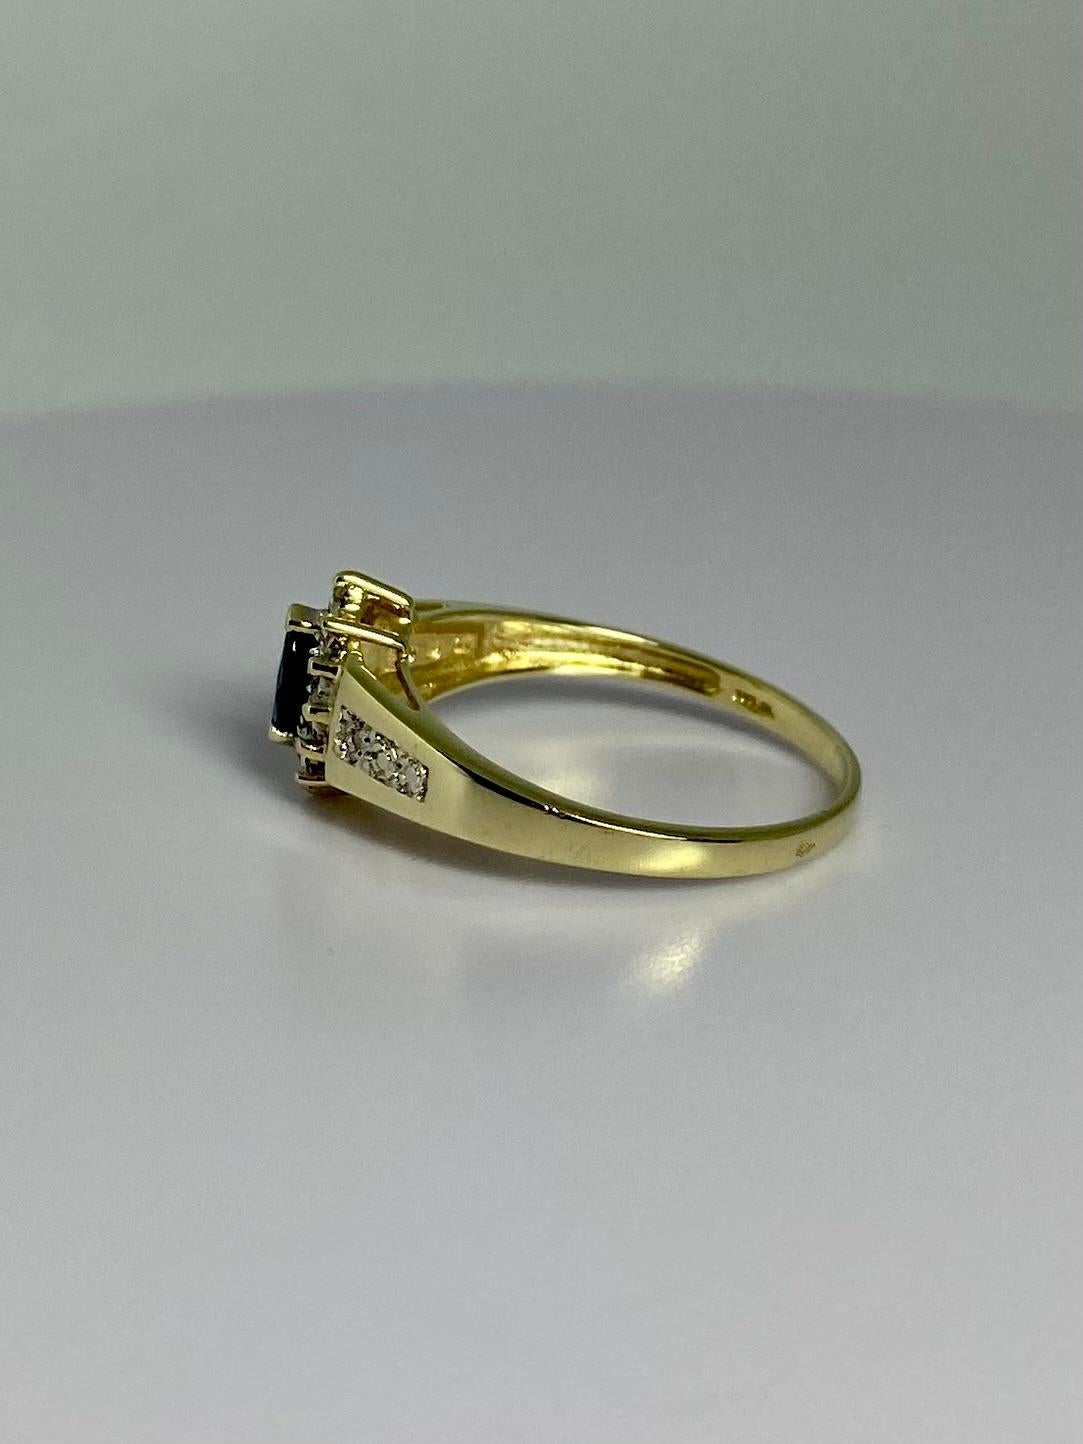 Elegant ring made of 14 ct yellow gold with oval blue sapphire&diamond stimulant For Sale 1